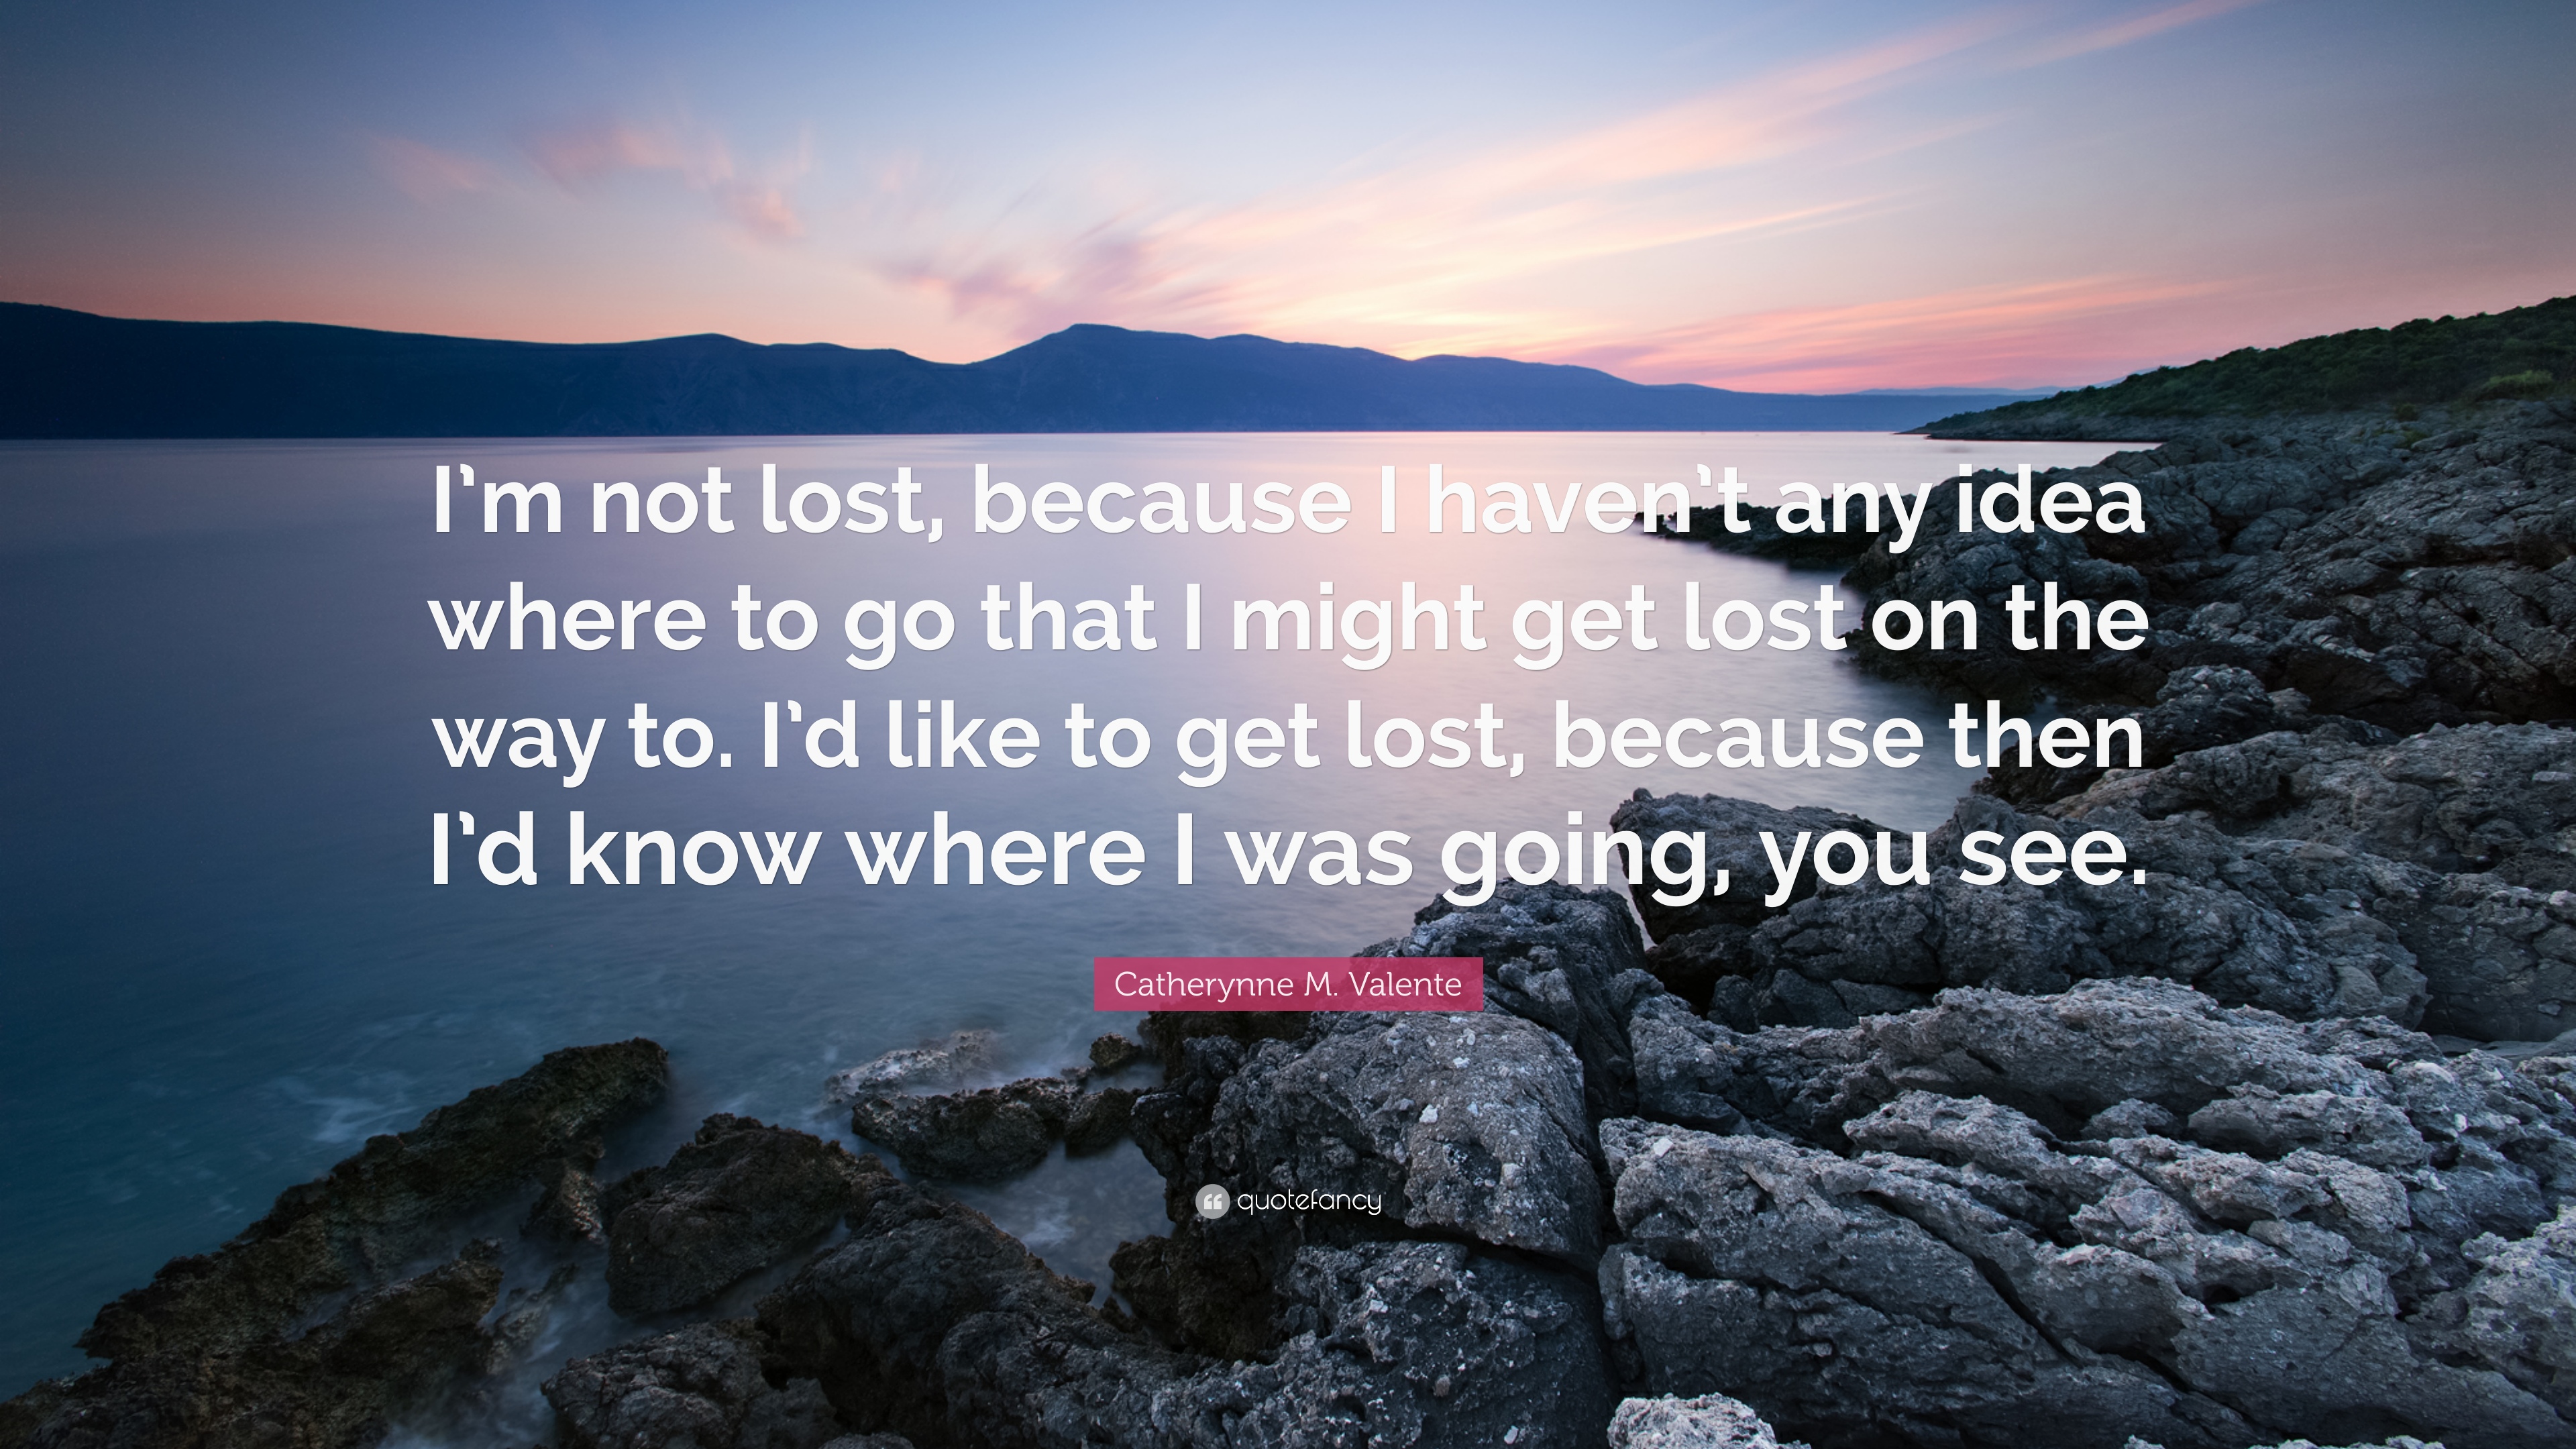 Catherynne M. Valente Quote: “I'm not lost, because I haven't any ...